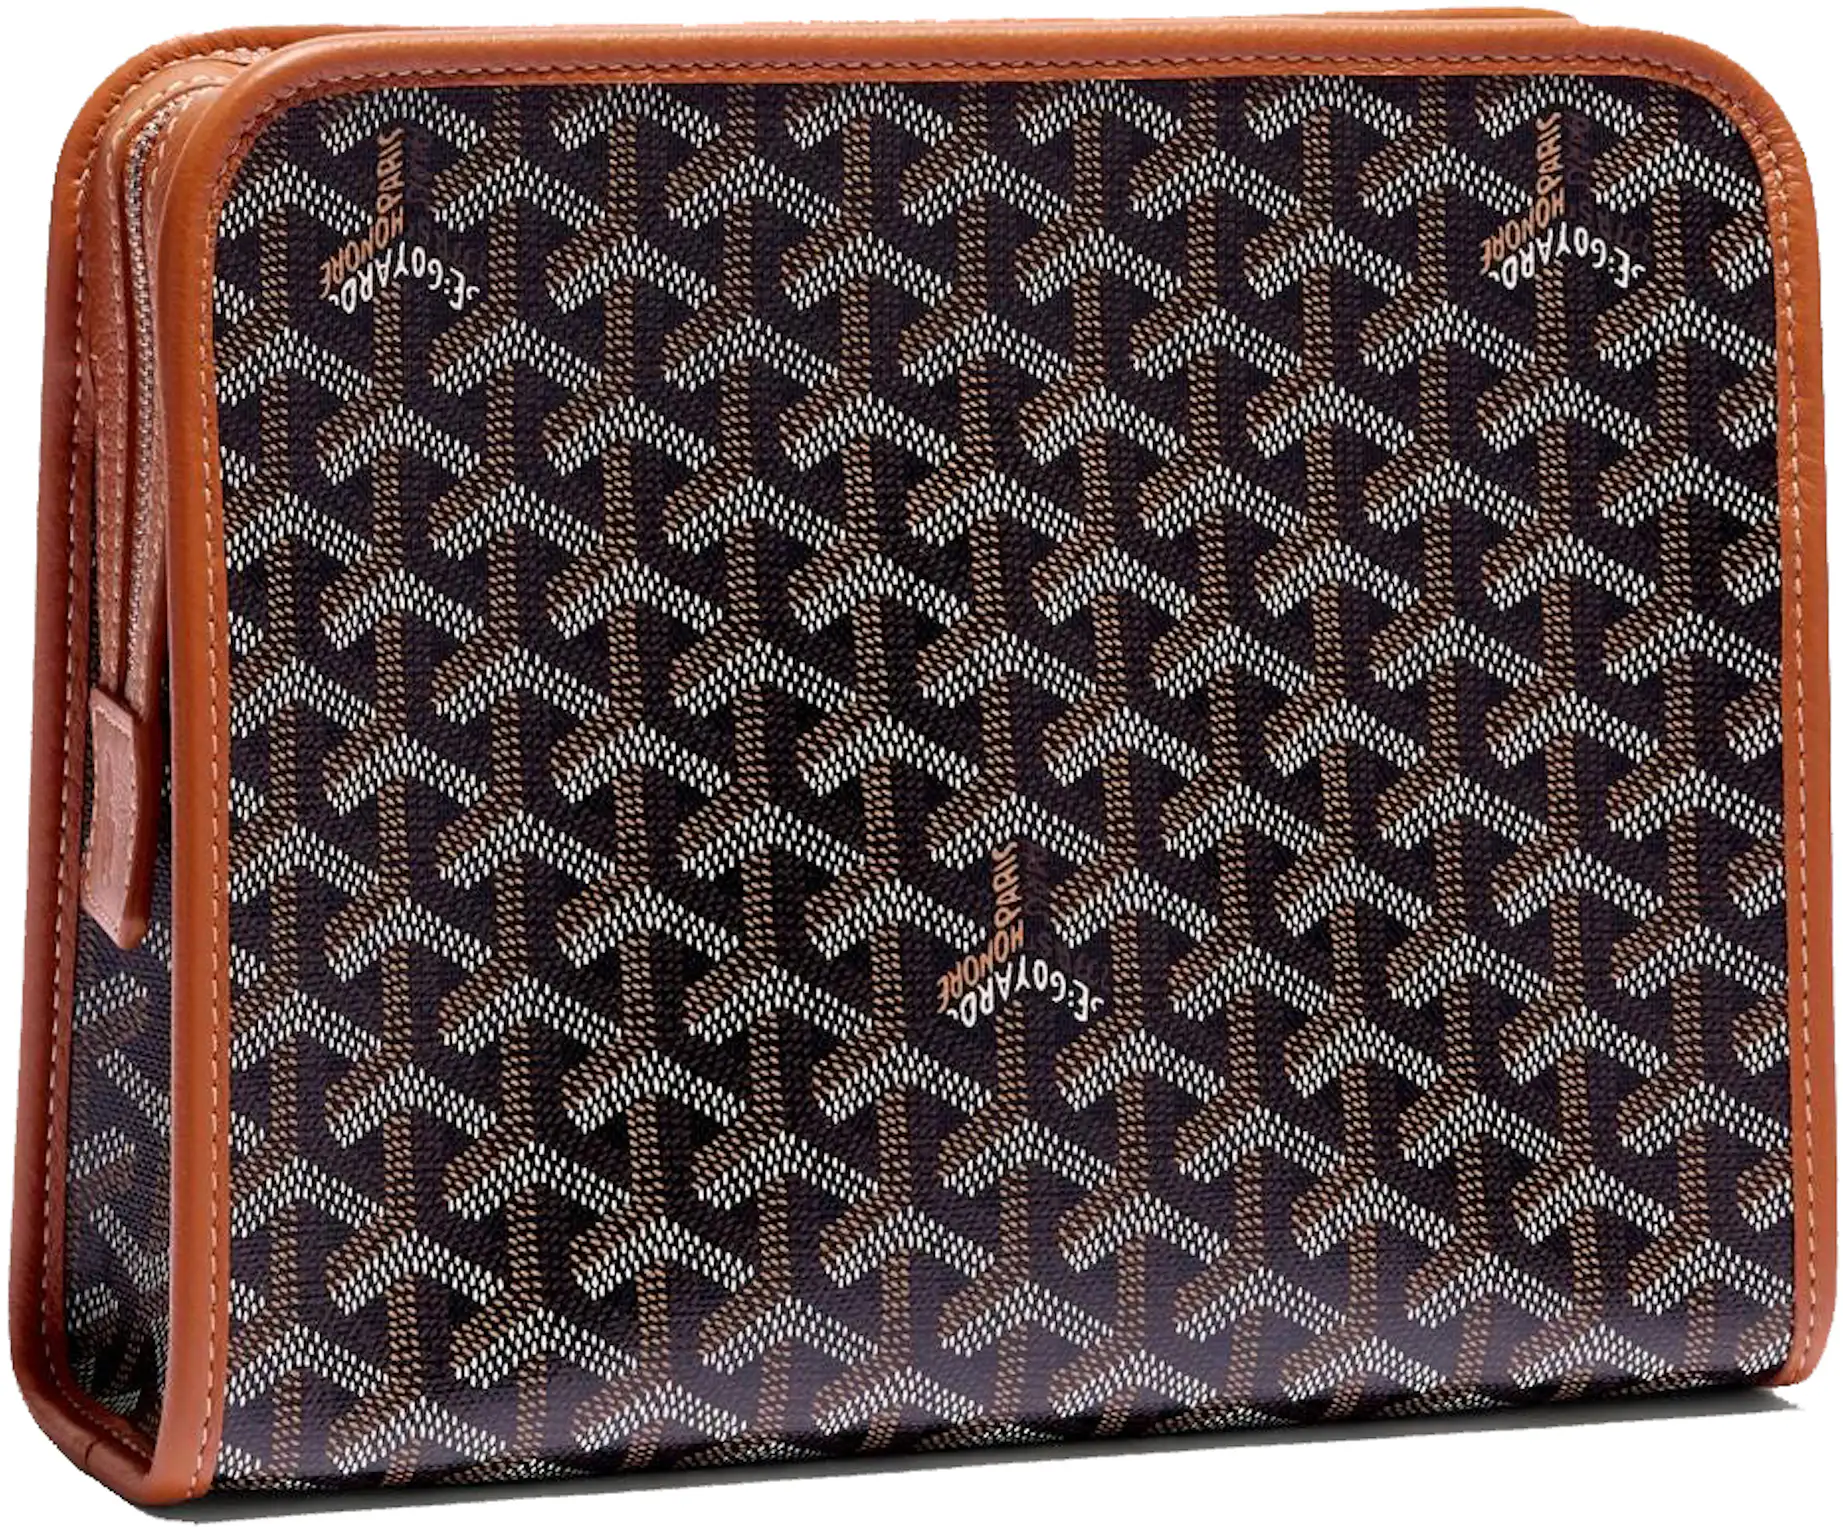 Goyard Jouvence Toiletry Bag MM Black/Brown in Canvas/Calfskin with ...